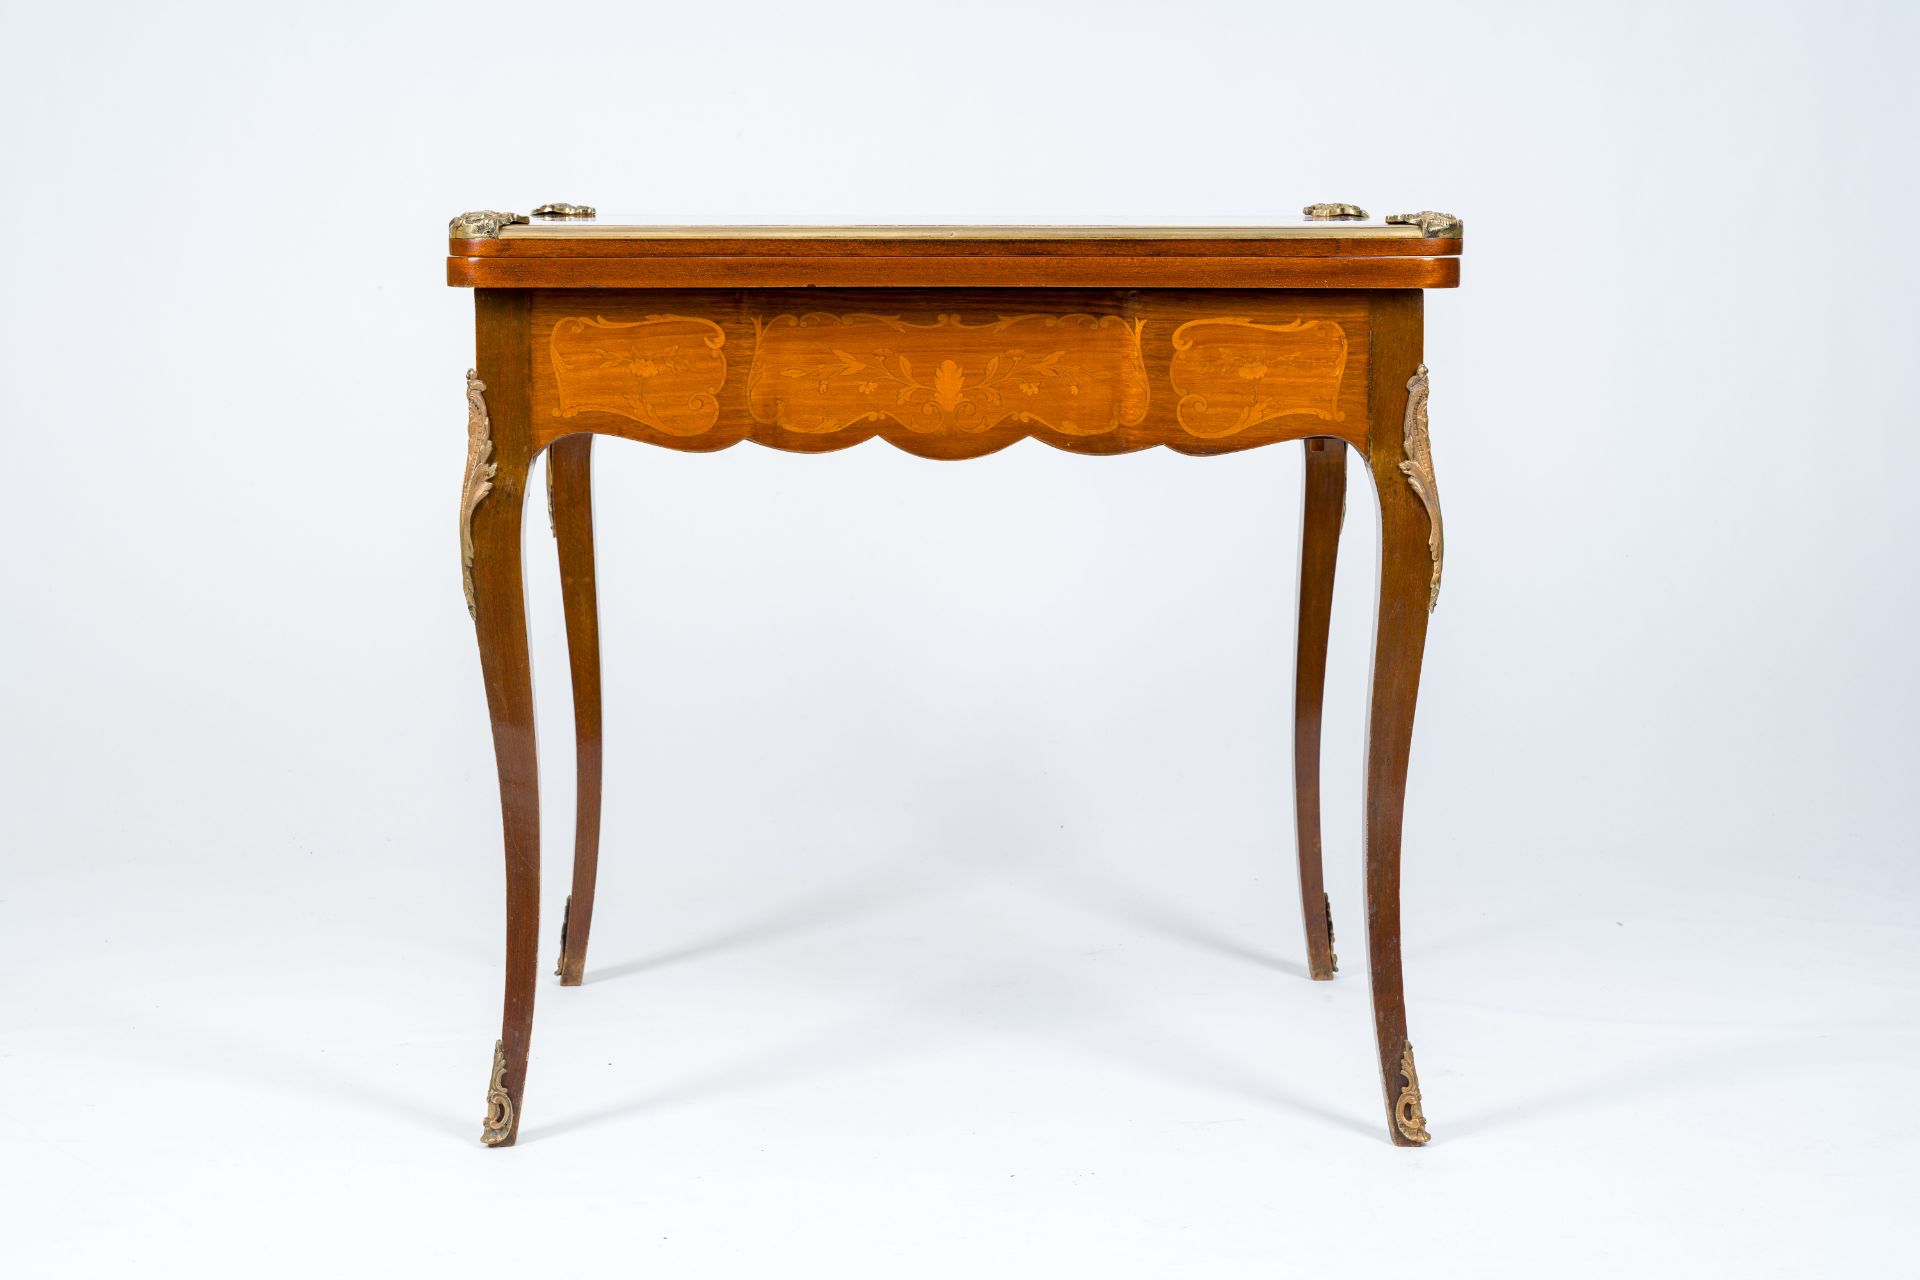 A French bronze mounted wood game table with marquetry top, 19th/20th C. - Image 5 of 10